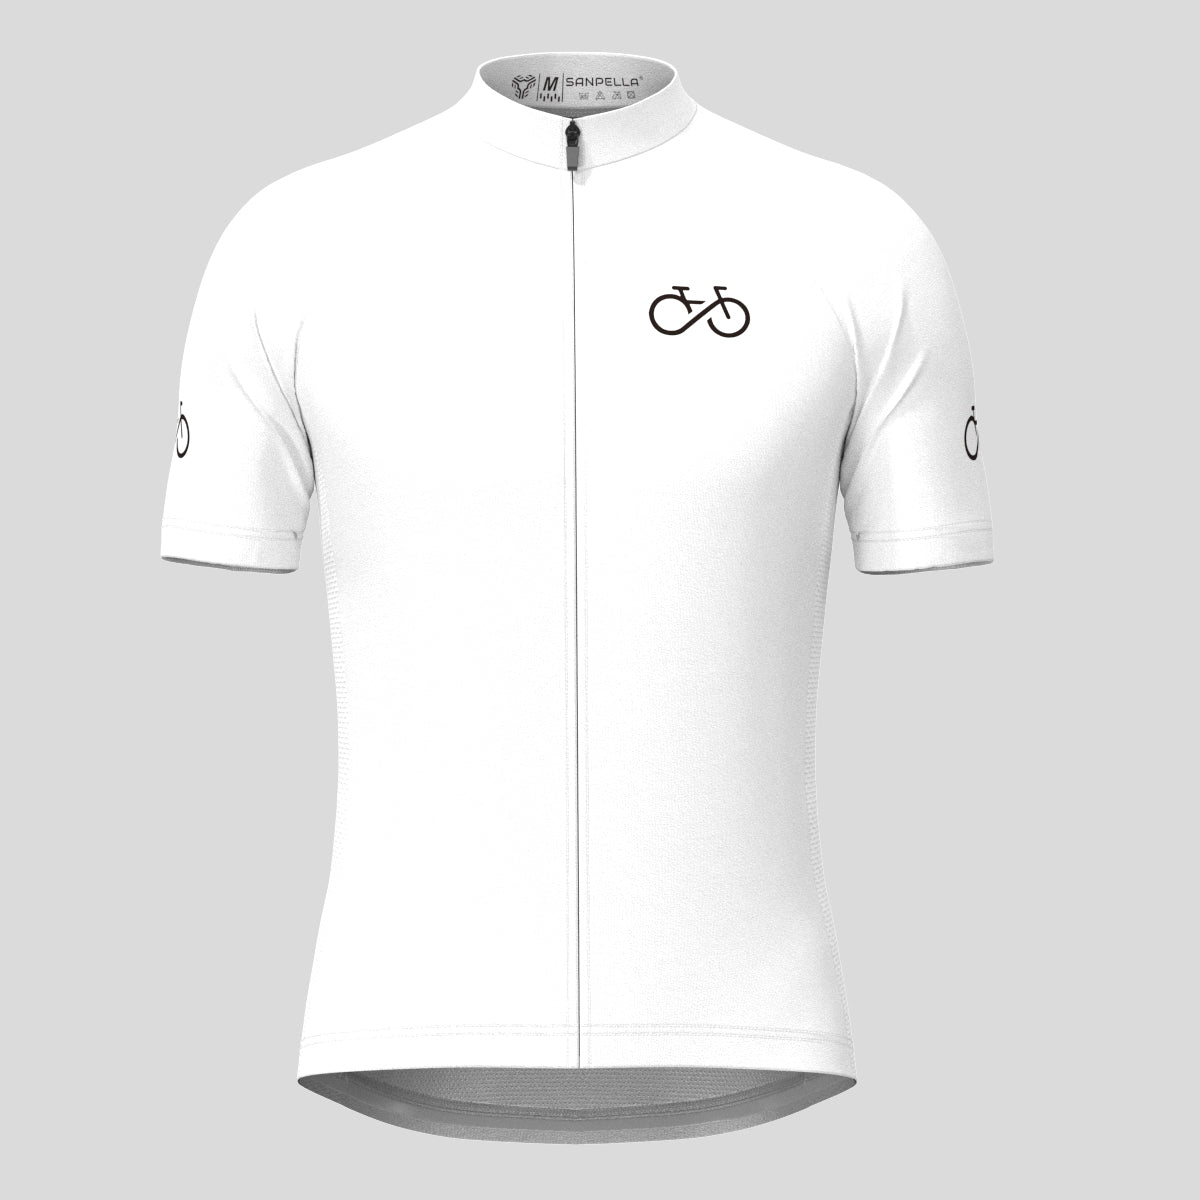 Ride Forever Men's Cycling Jersey -White